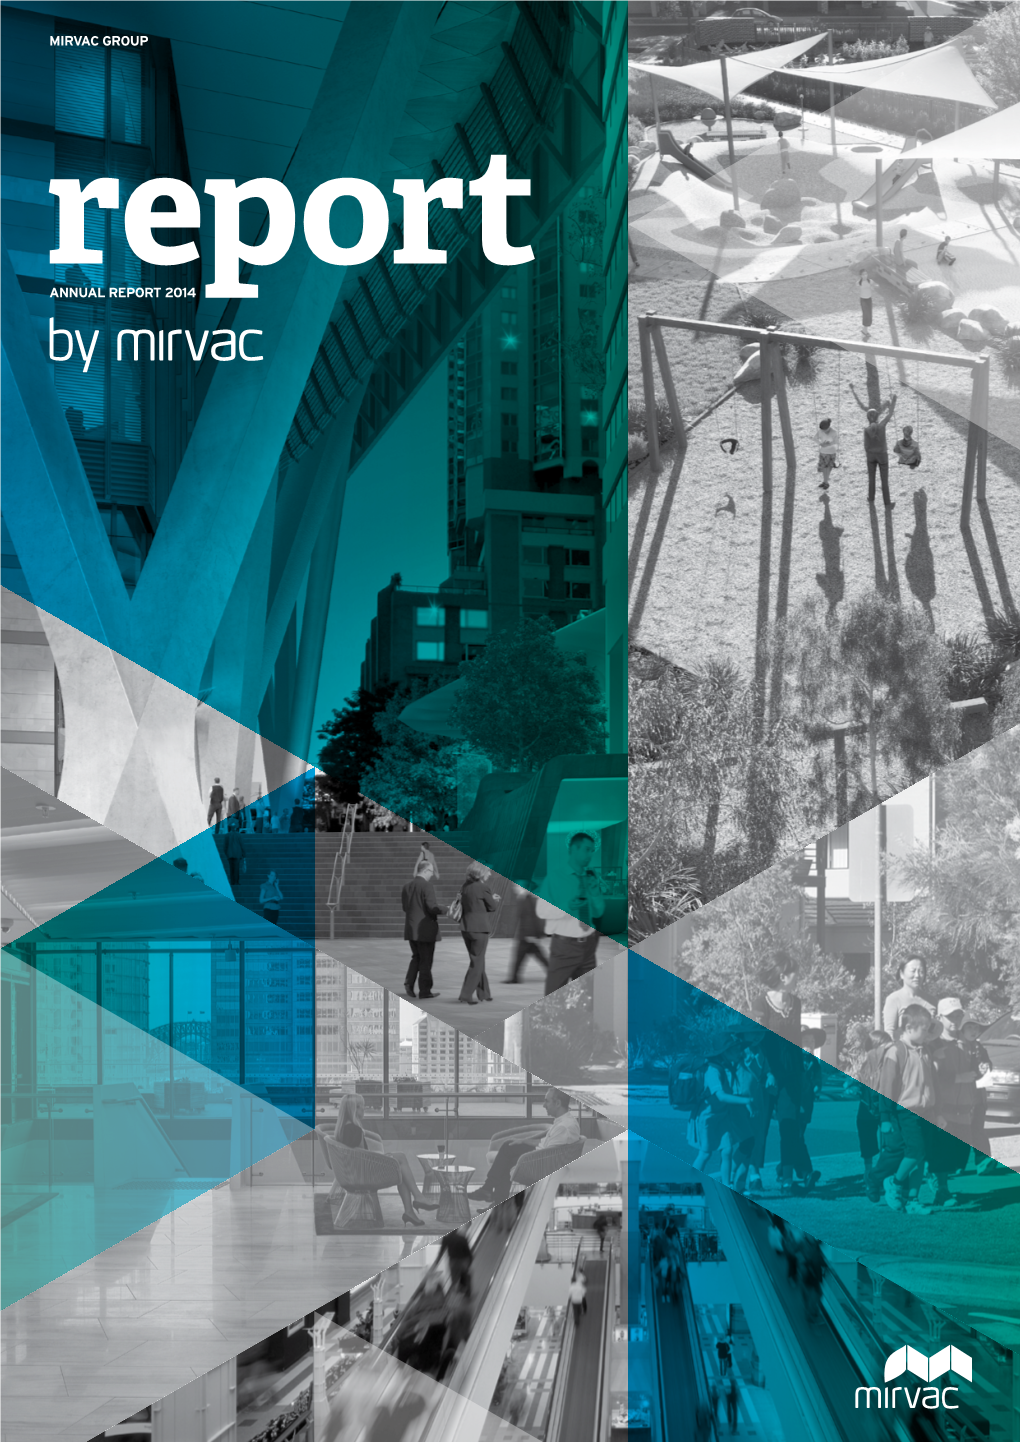 Annual Report 2014 Mirvac Group